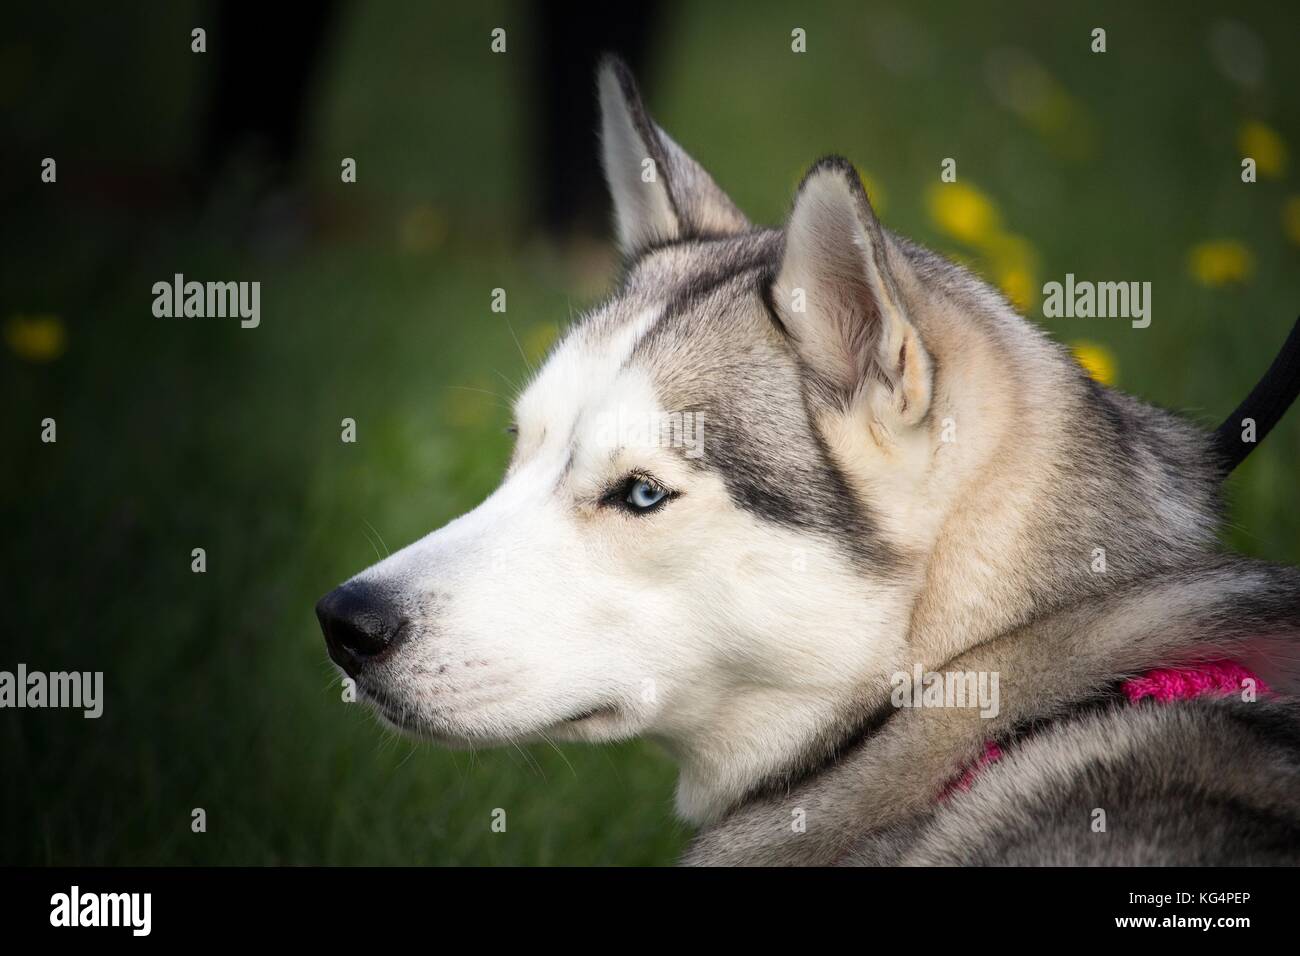 portrait of the head of a husky dog with a pink necklace Stock Photo